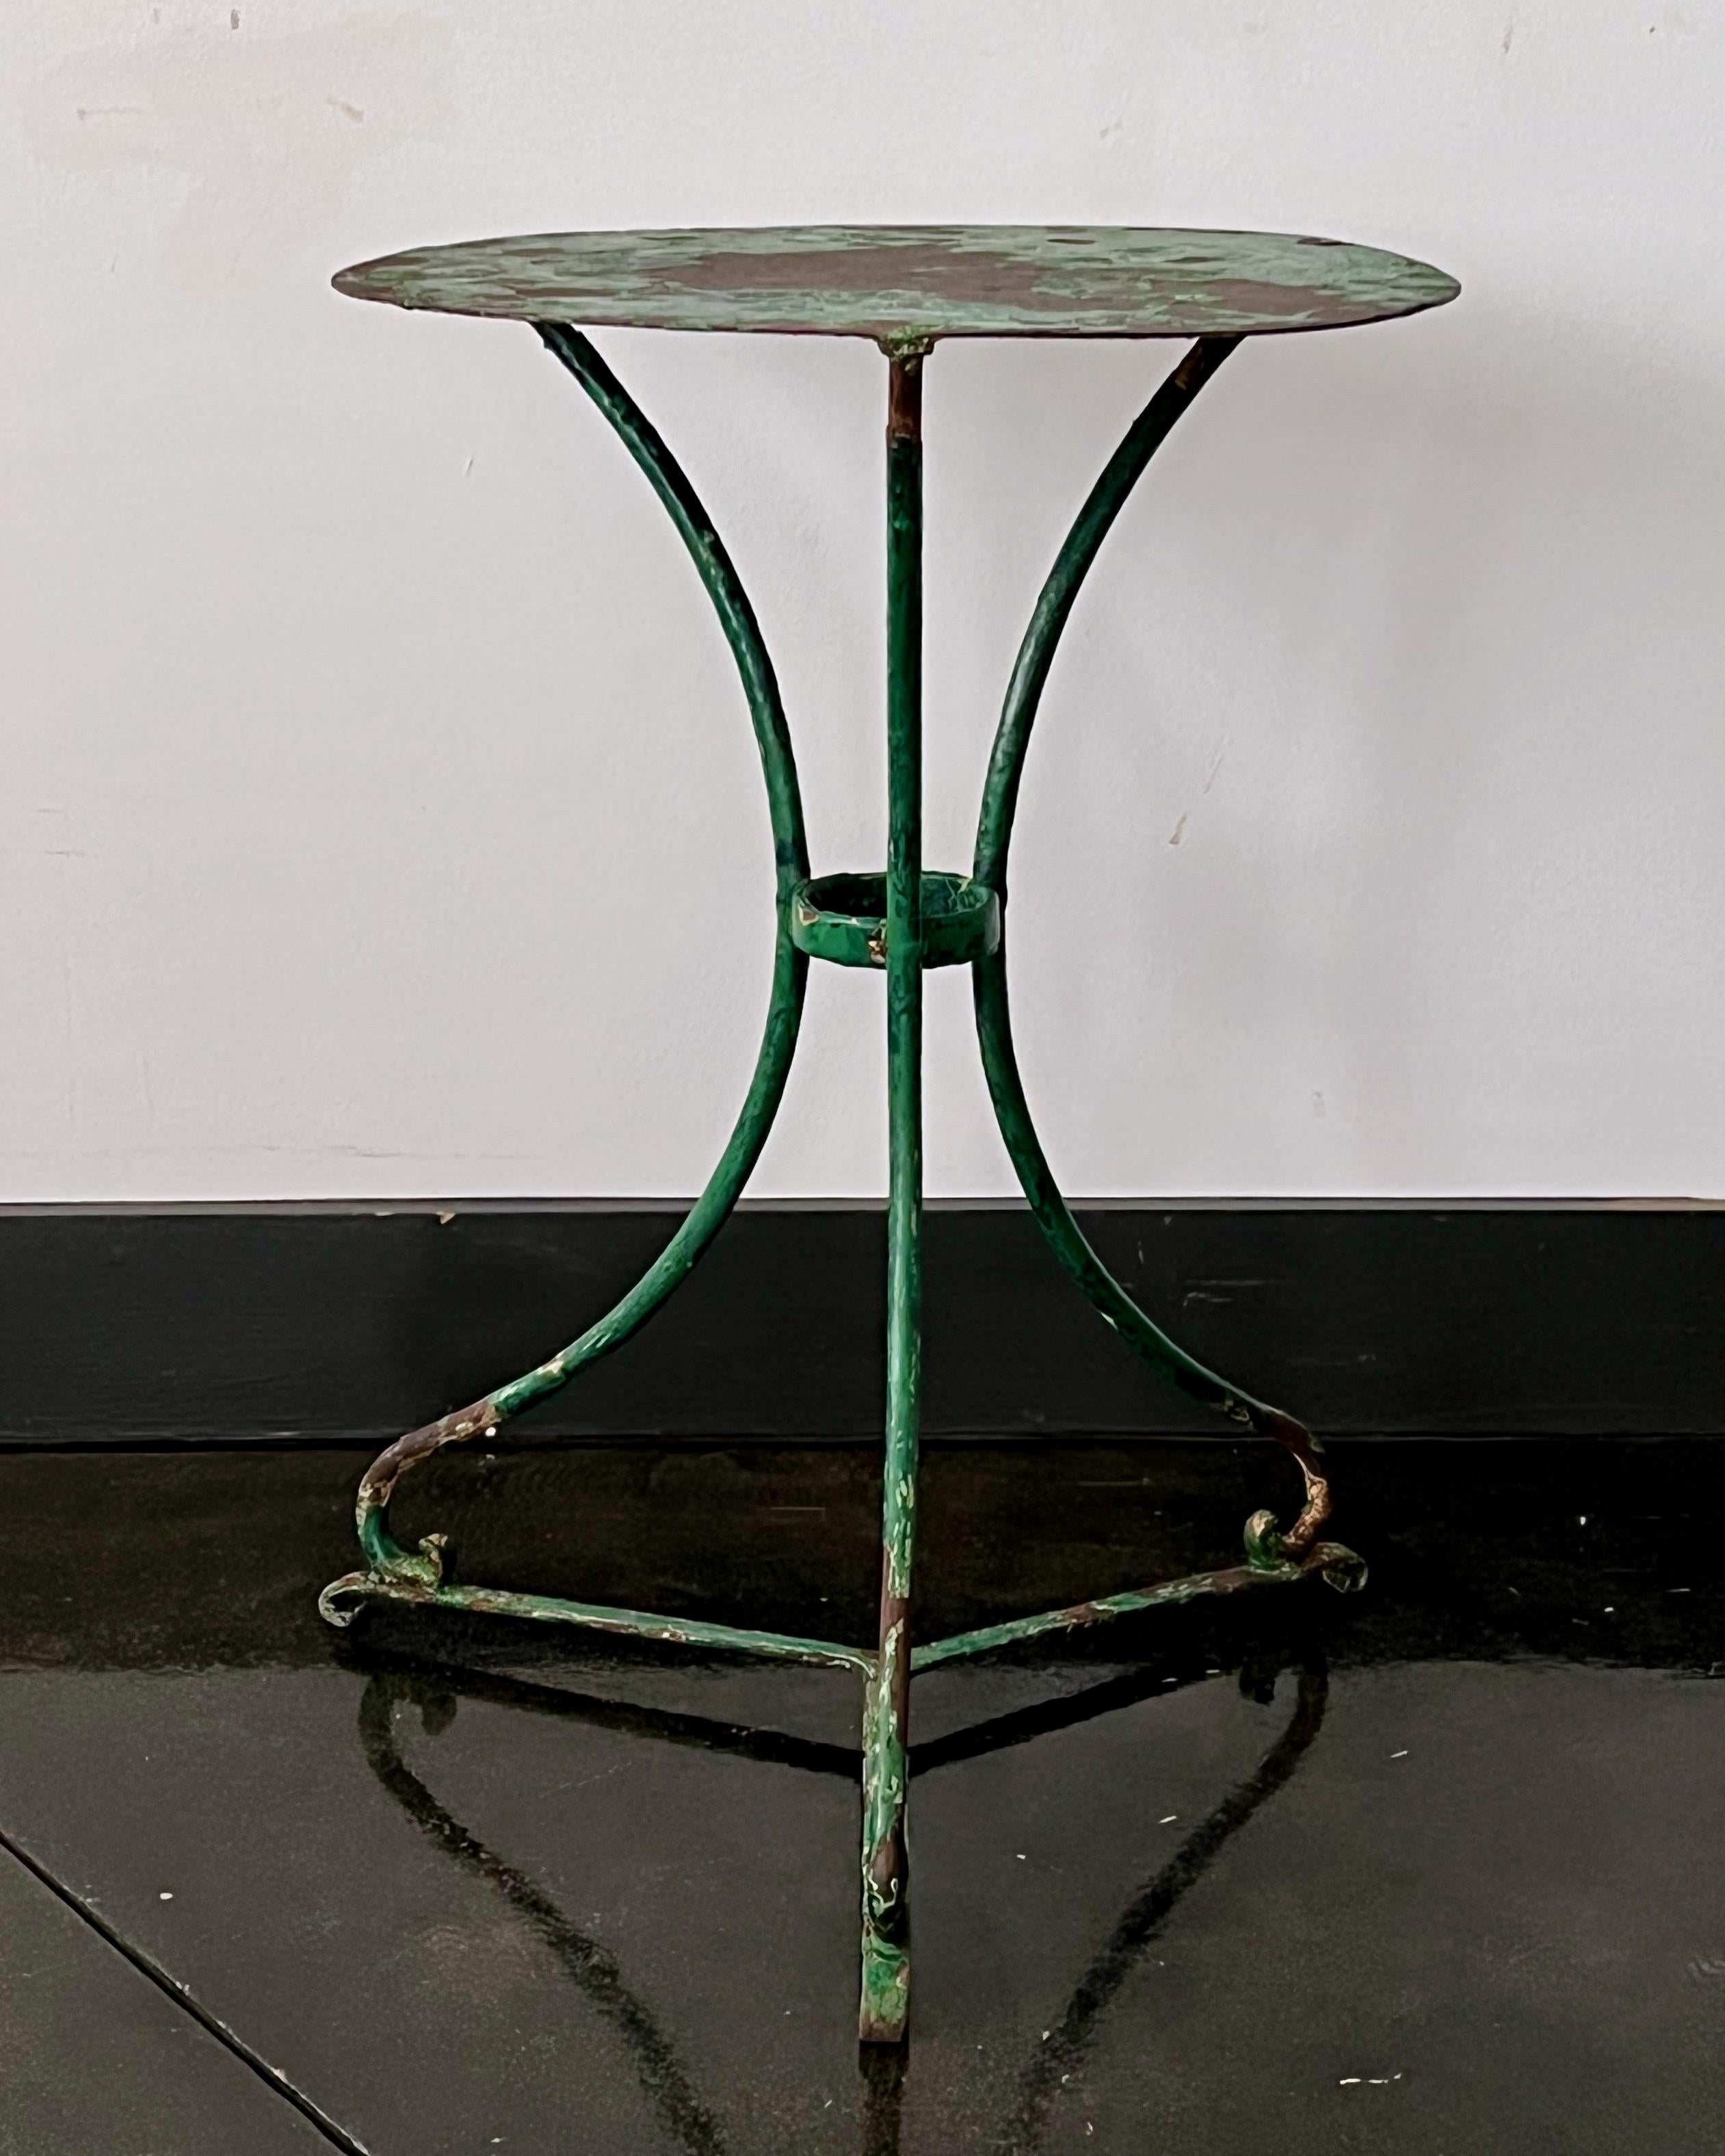 End of 19th century French bistro table with many old worn layers of green tones. Riveted, with shapely wrought iron legs and steel metal top.